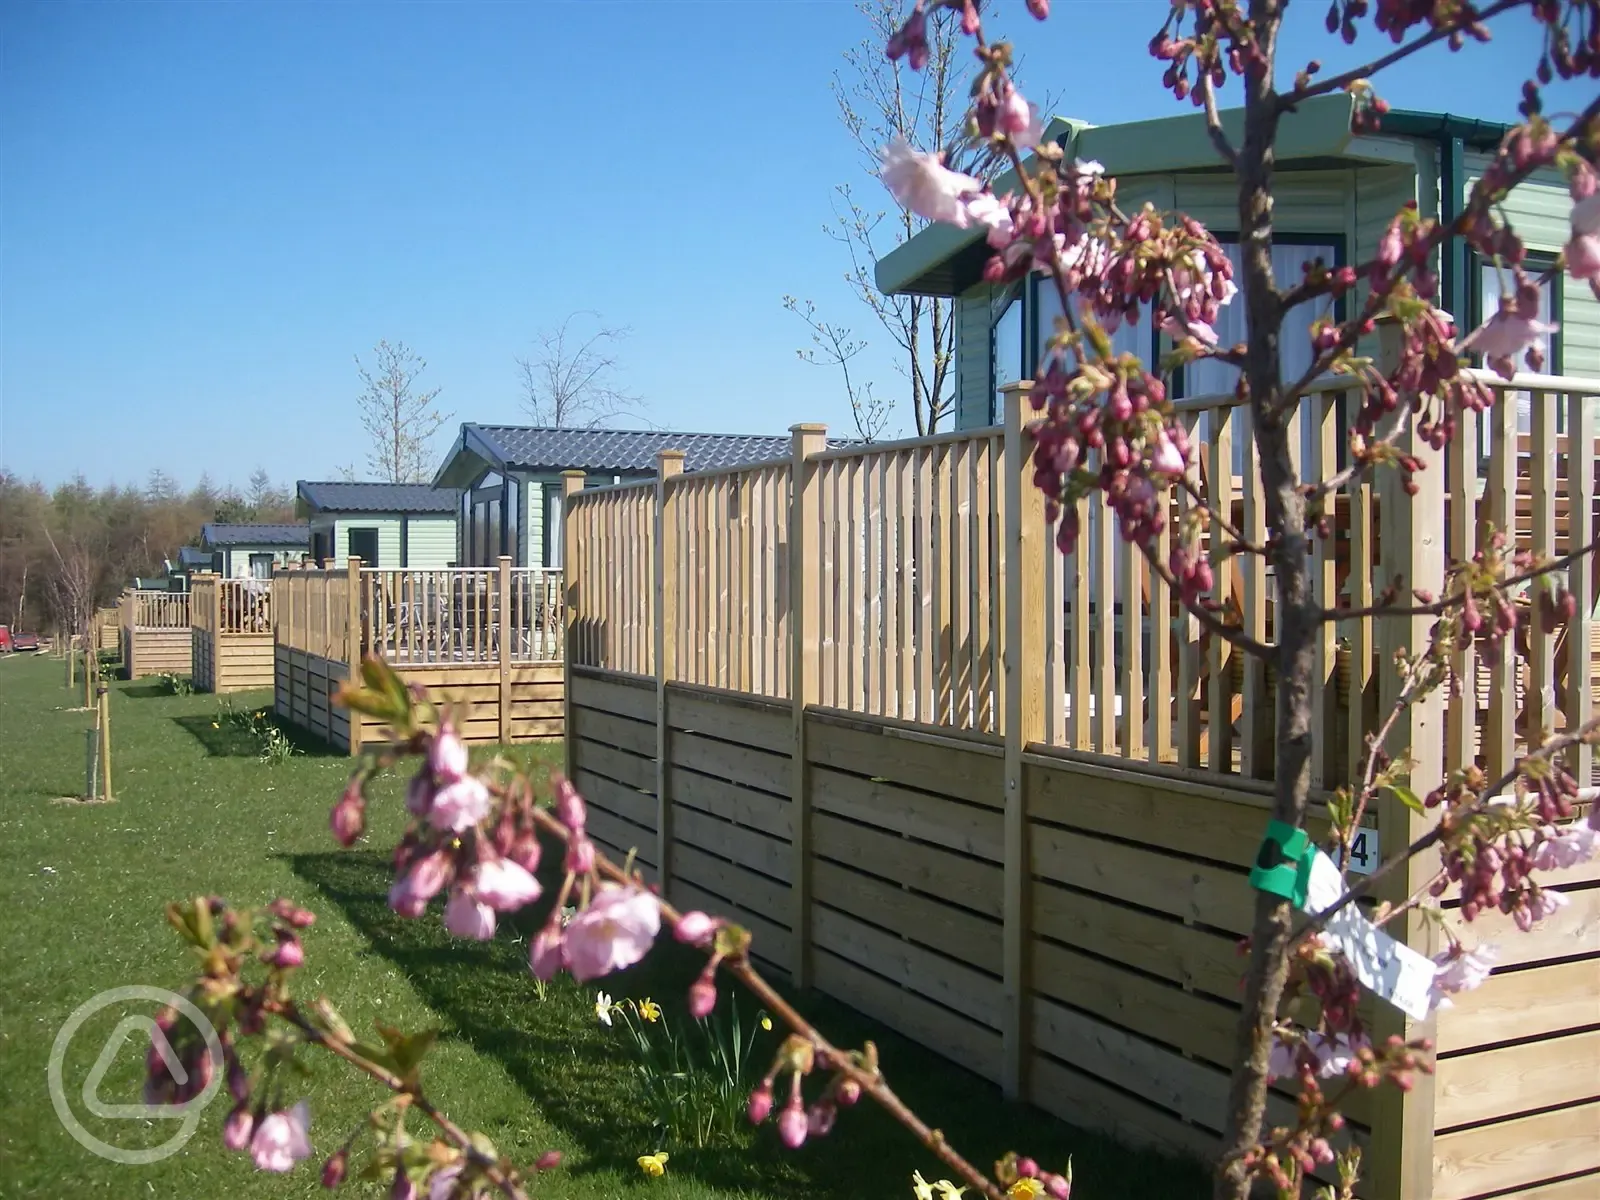 Holiday Homes for sale at Golden Square Caravan Park